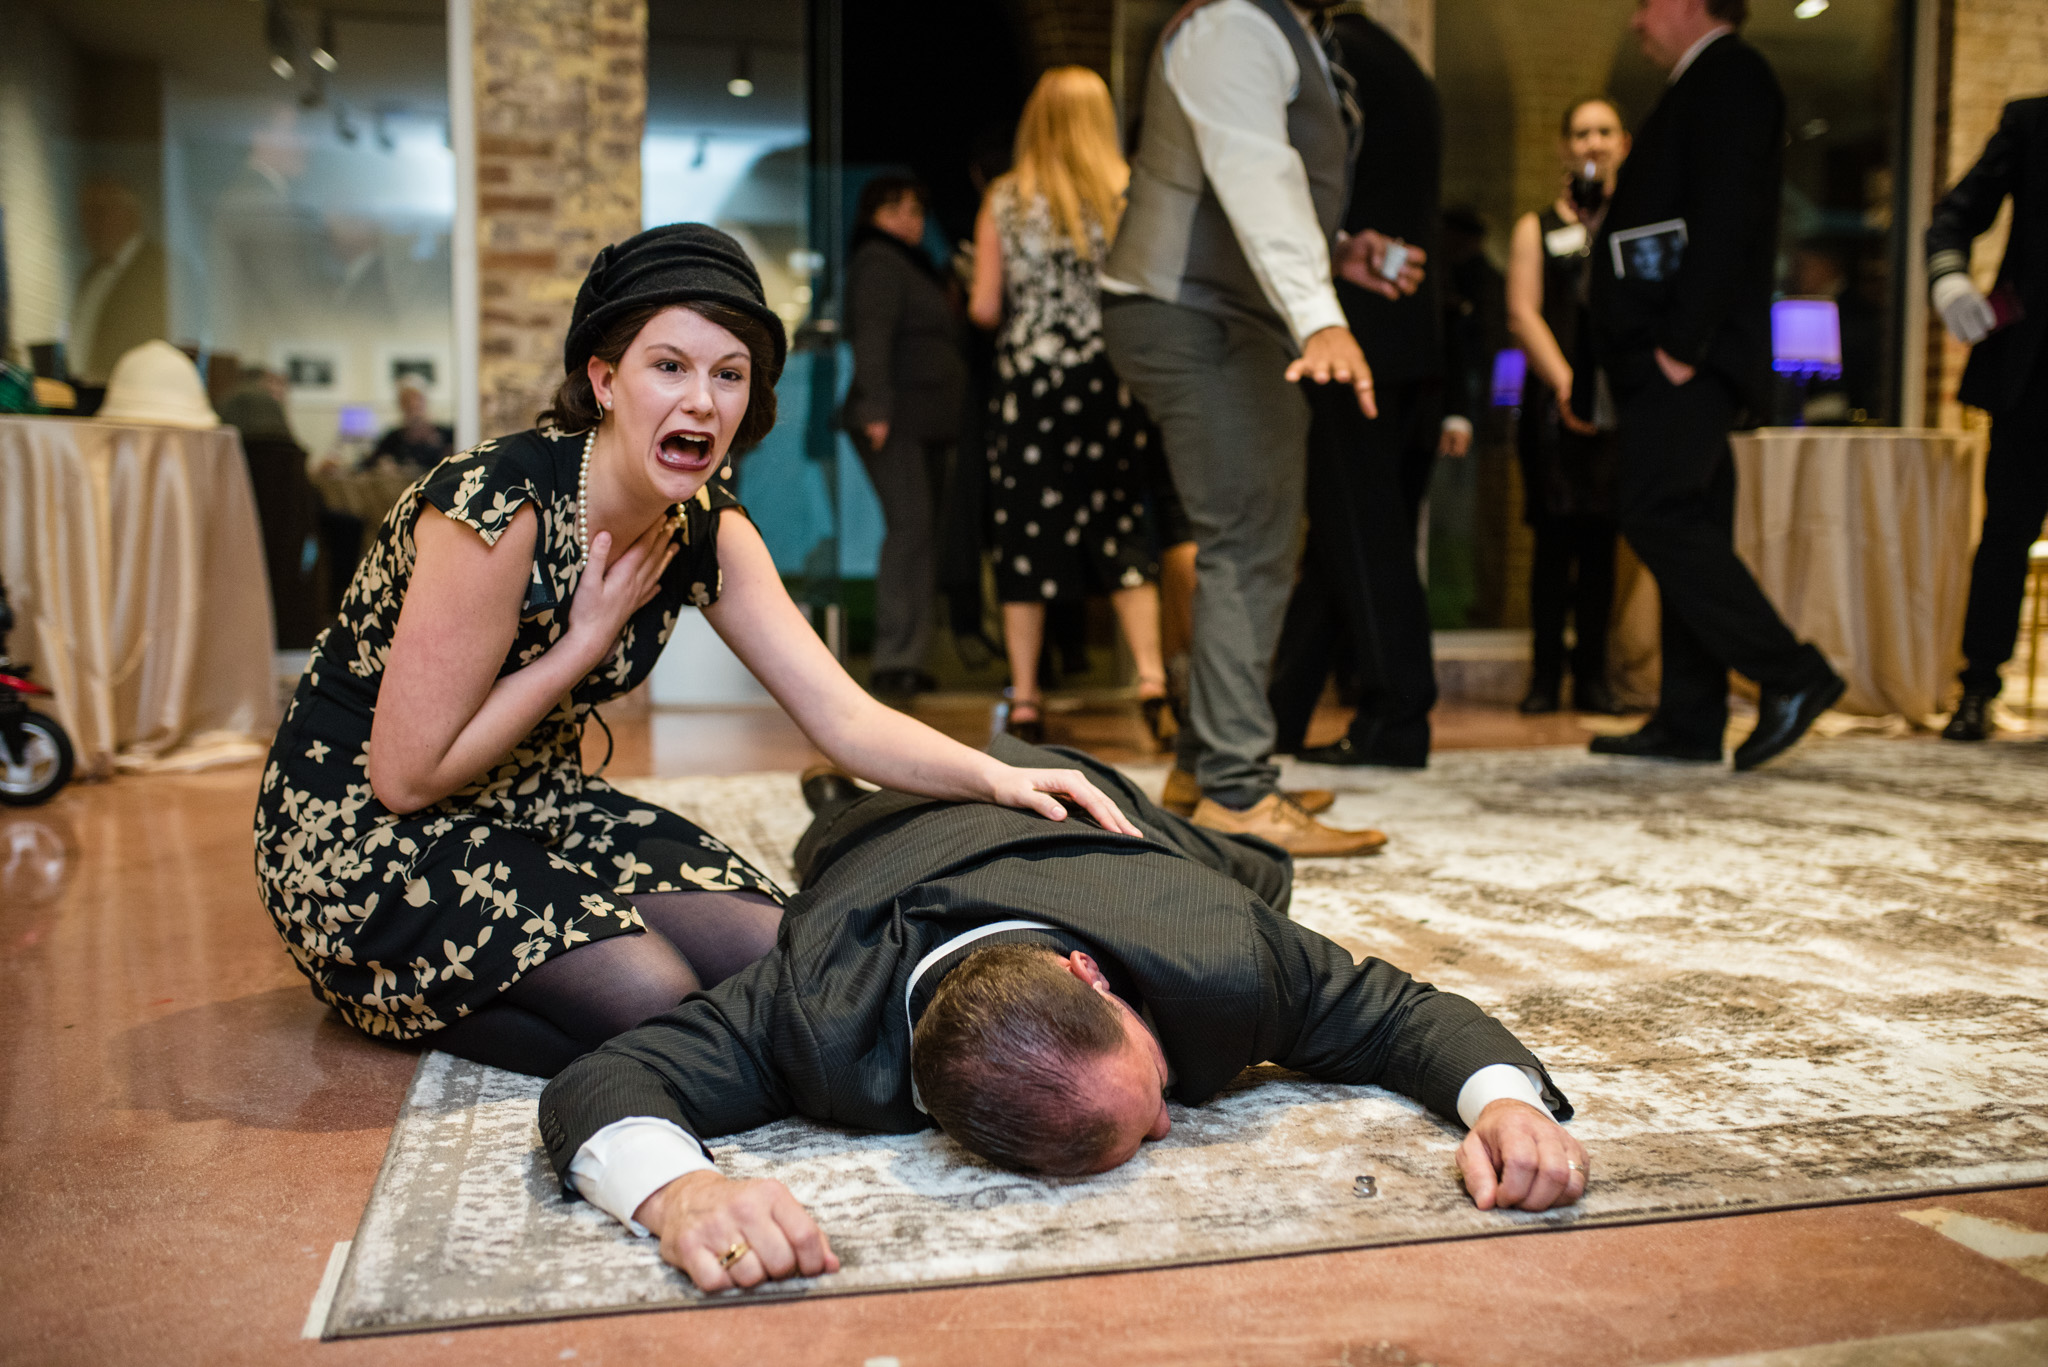 Murder on the Orient Express at the Workhouse Arts Center Gala